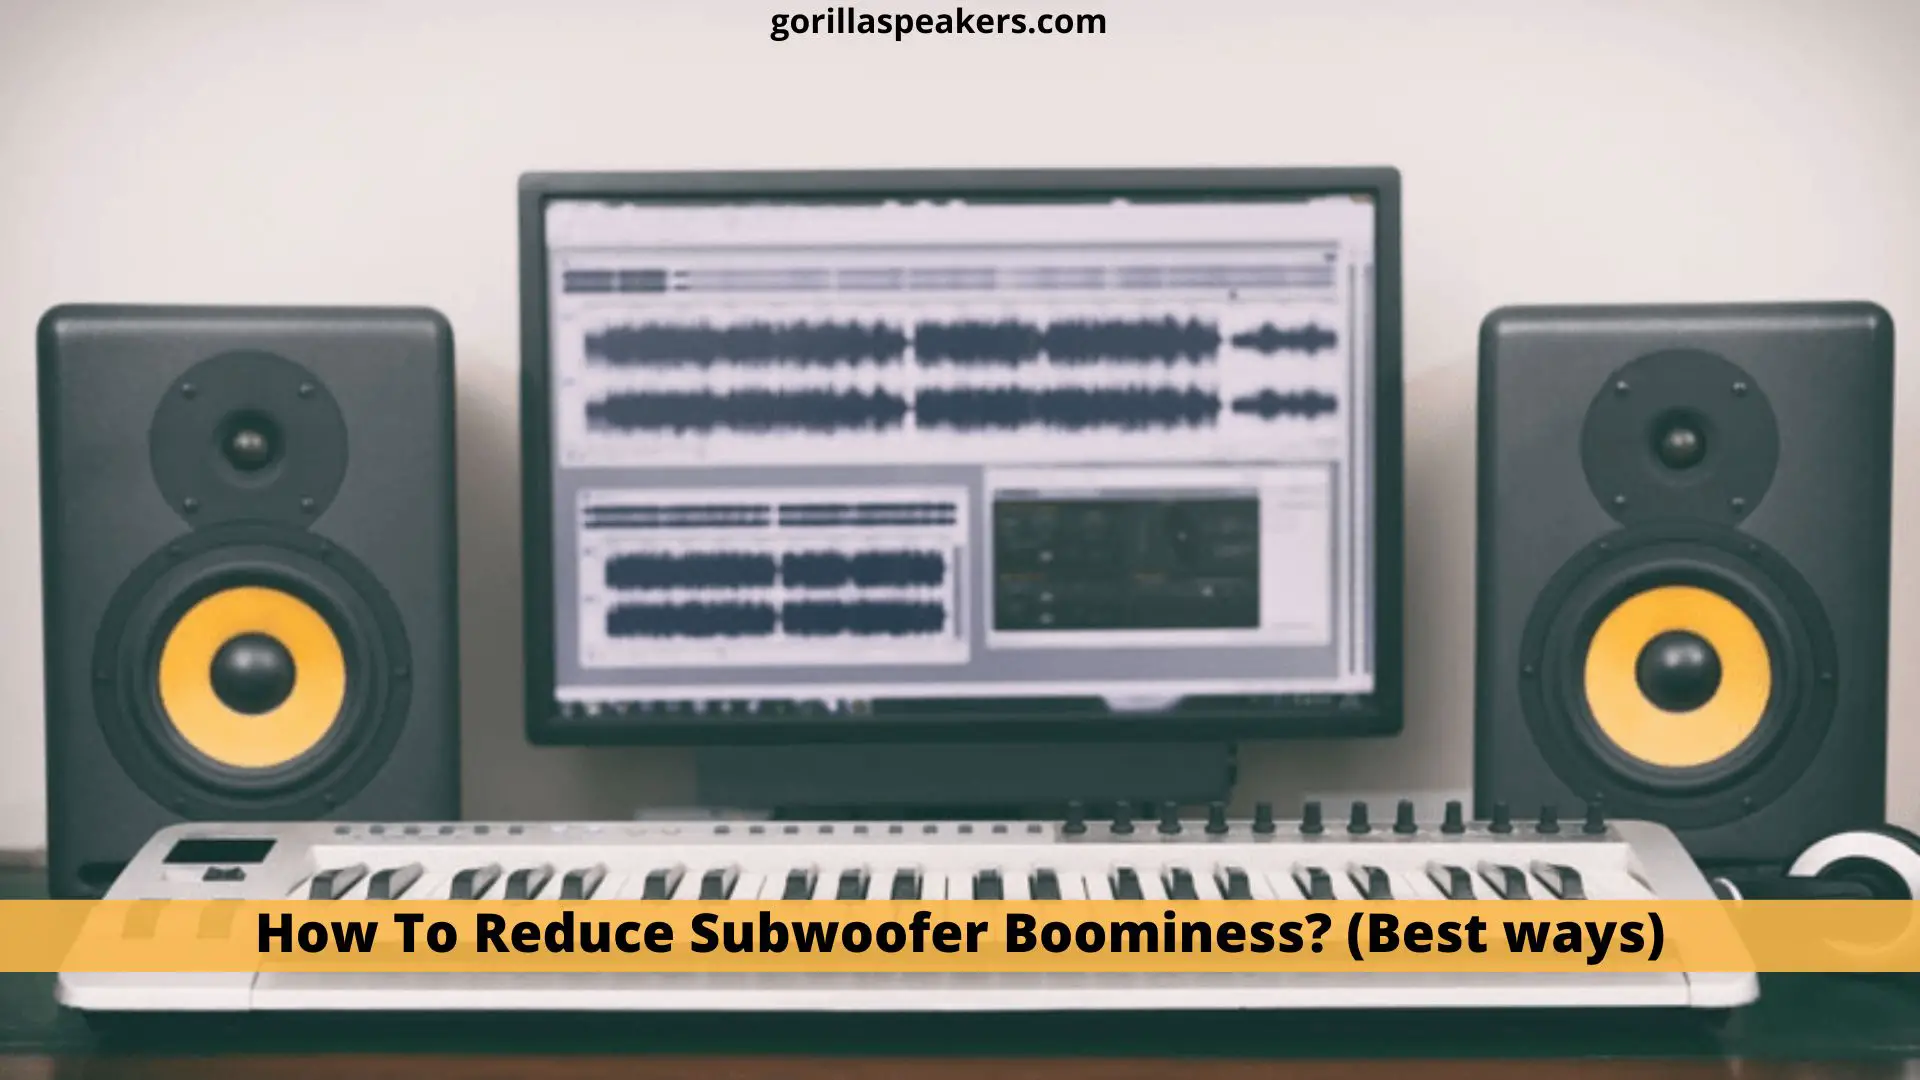 How To Reduce Subwoofer Boominess?